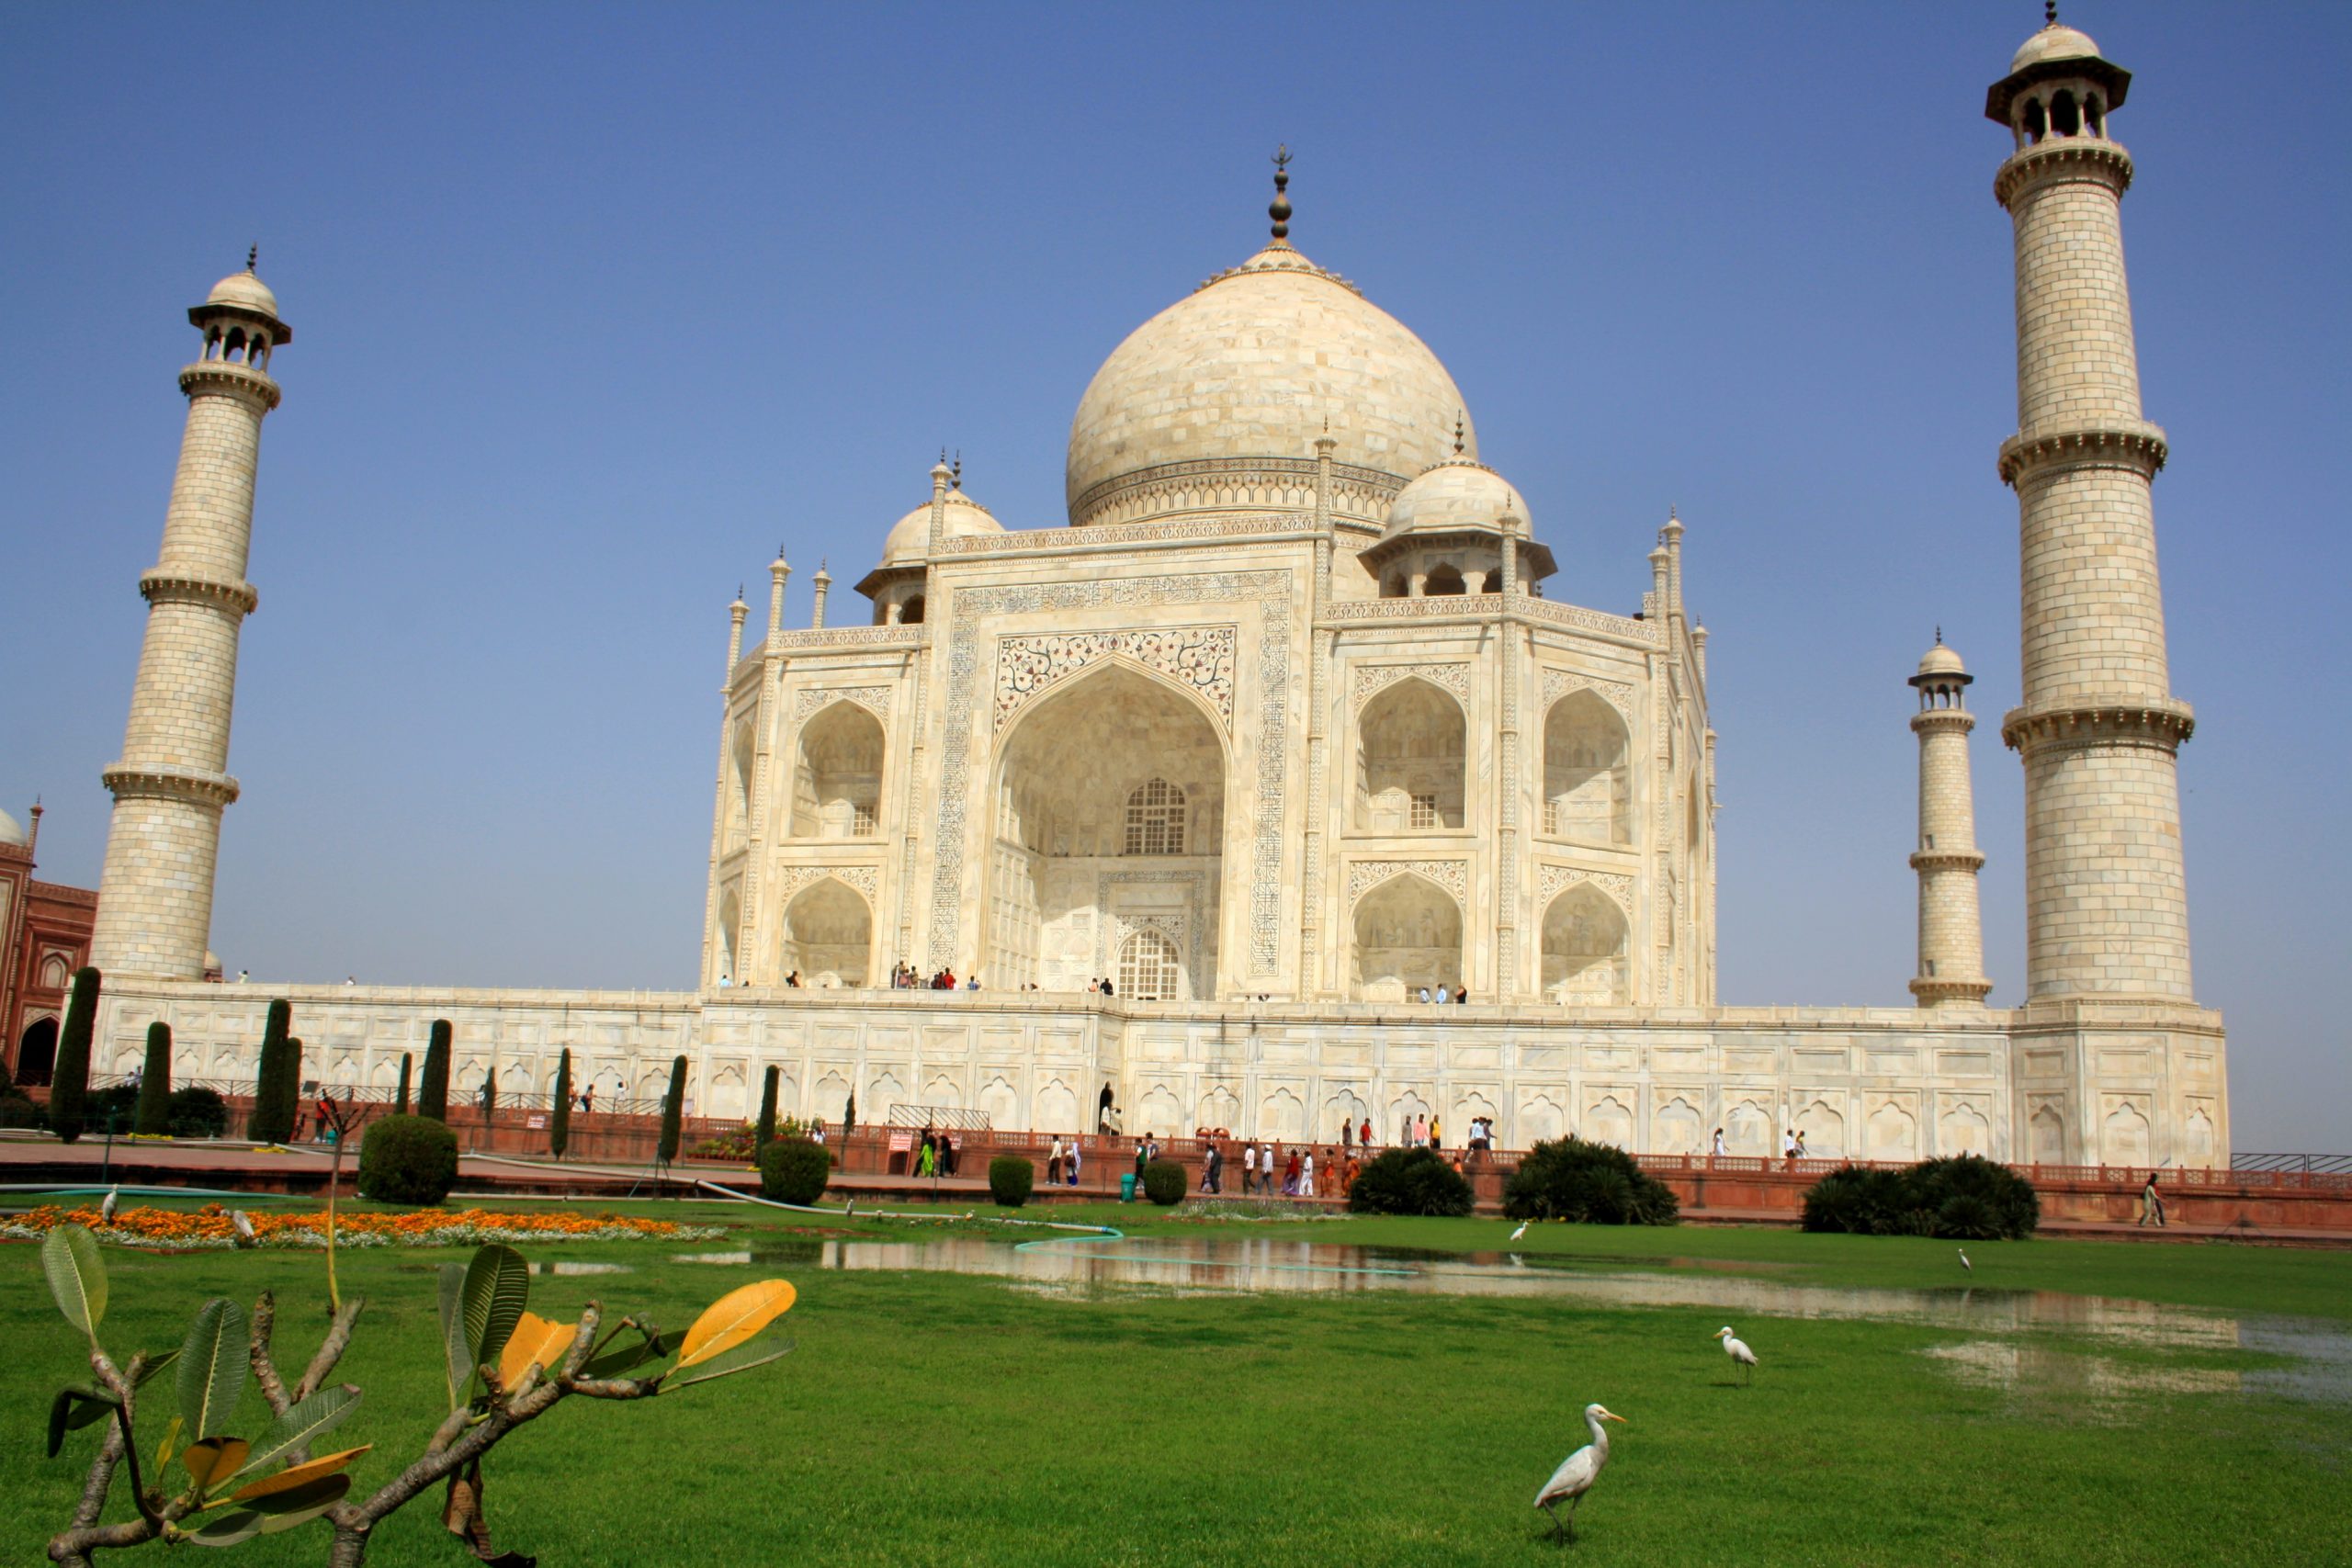 15 Interesting Facts About the Taj Mahal